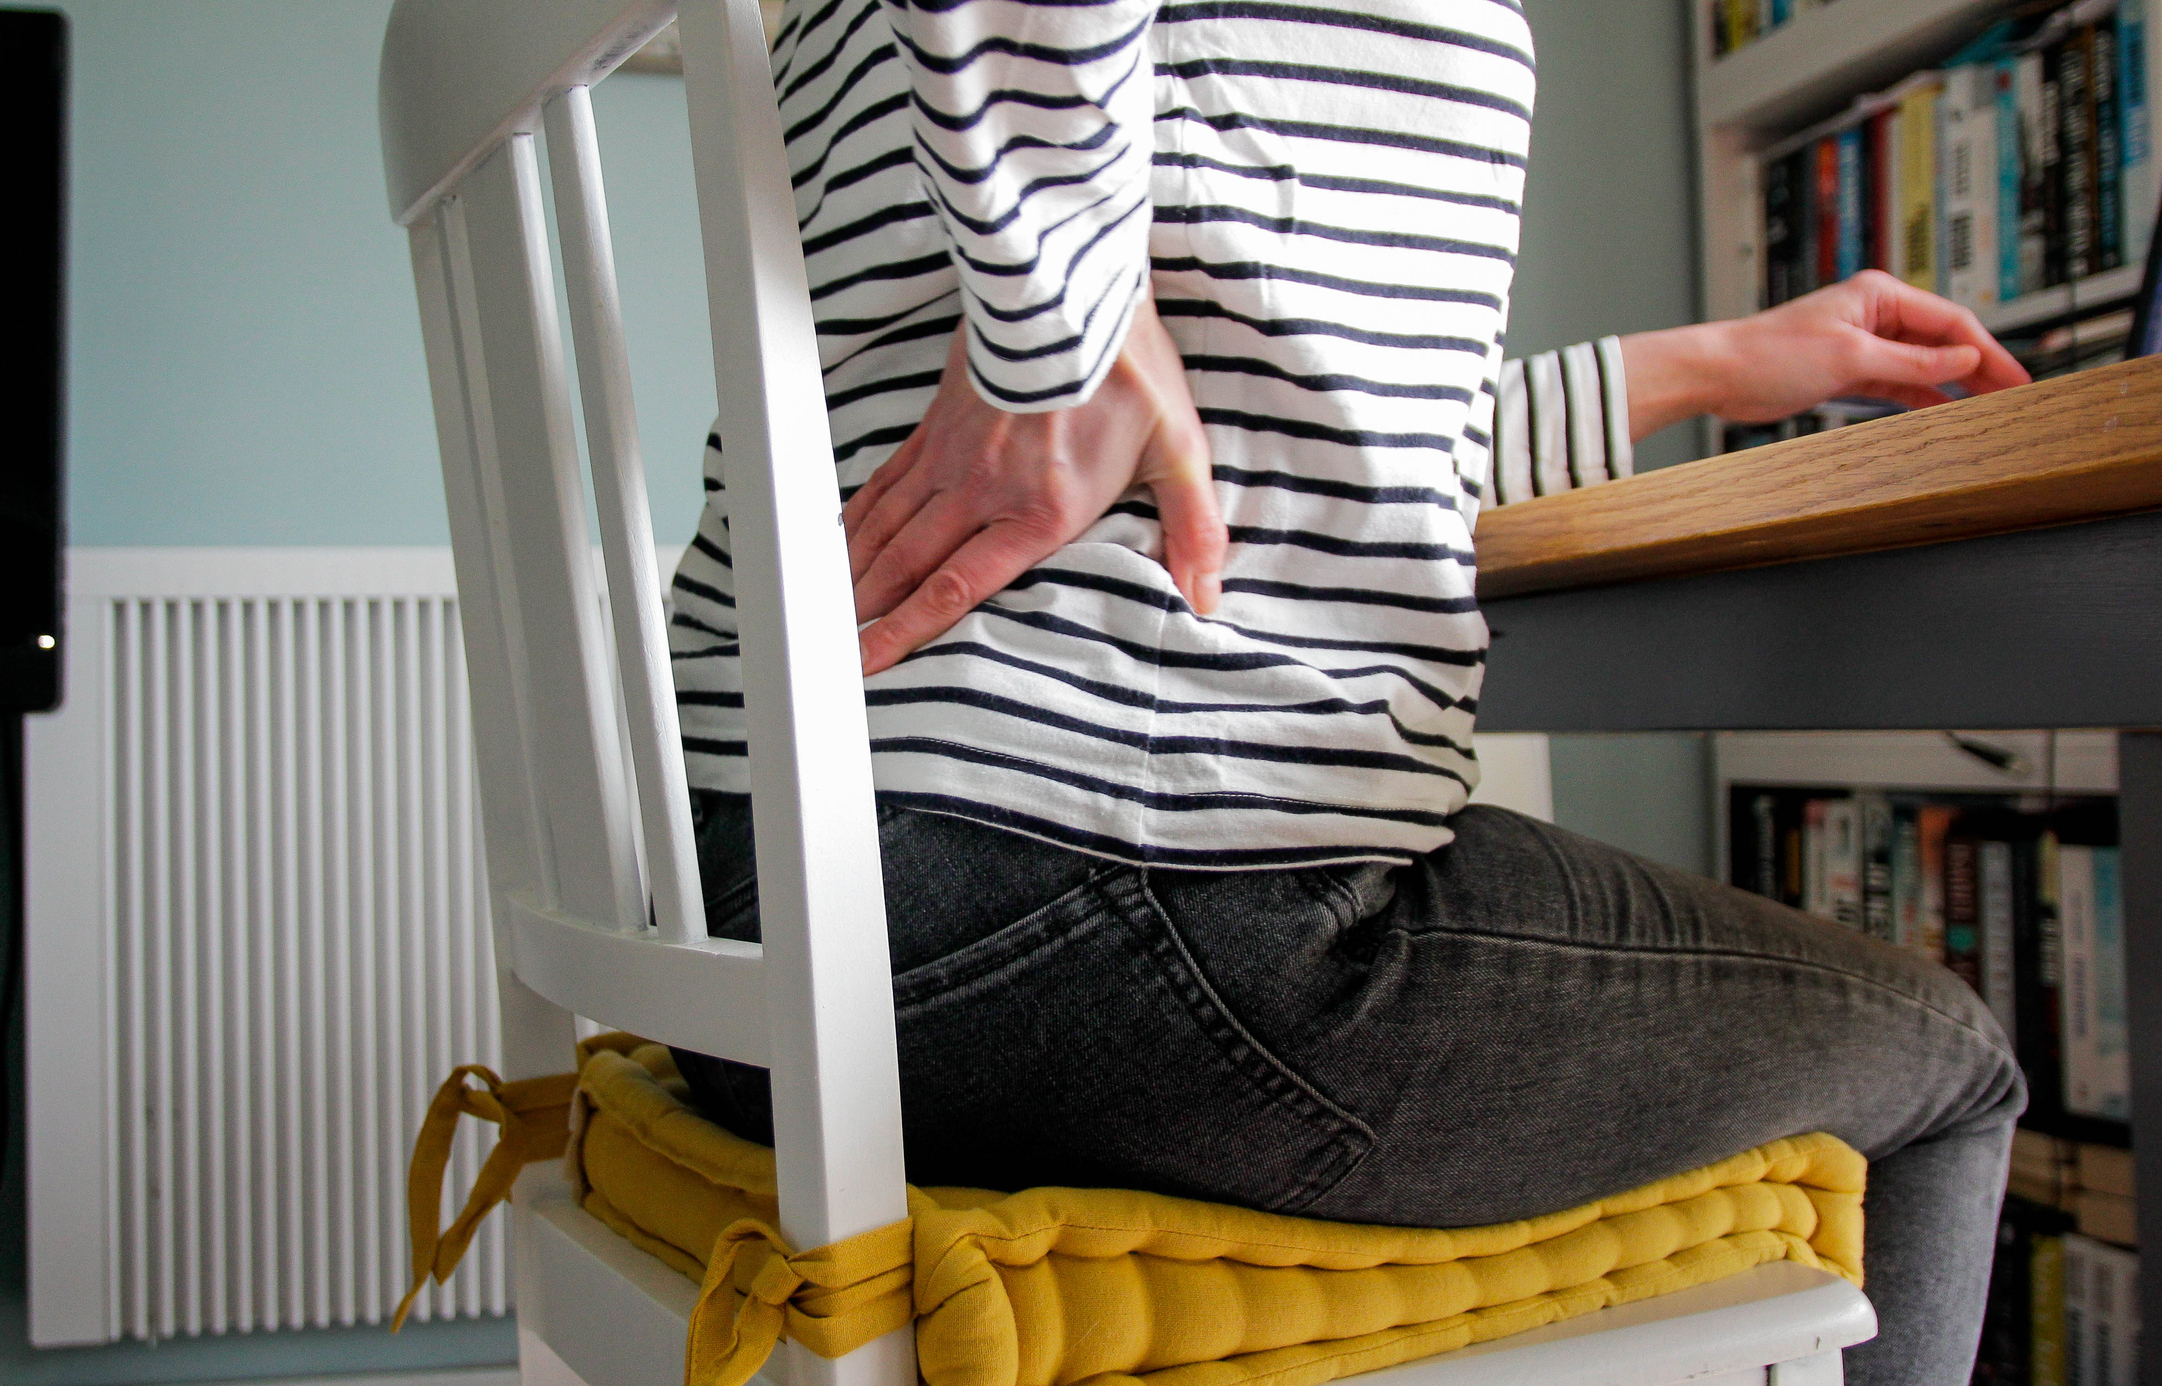 Person sitting on a chair with a striped top, hands on lower back, indicating stretching or back pain